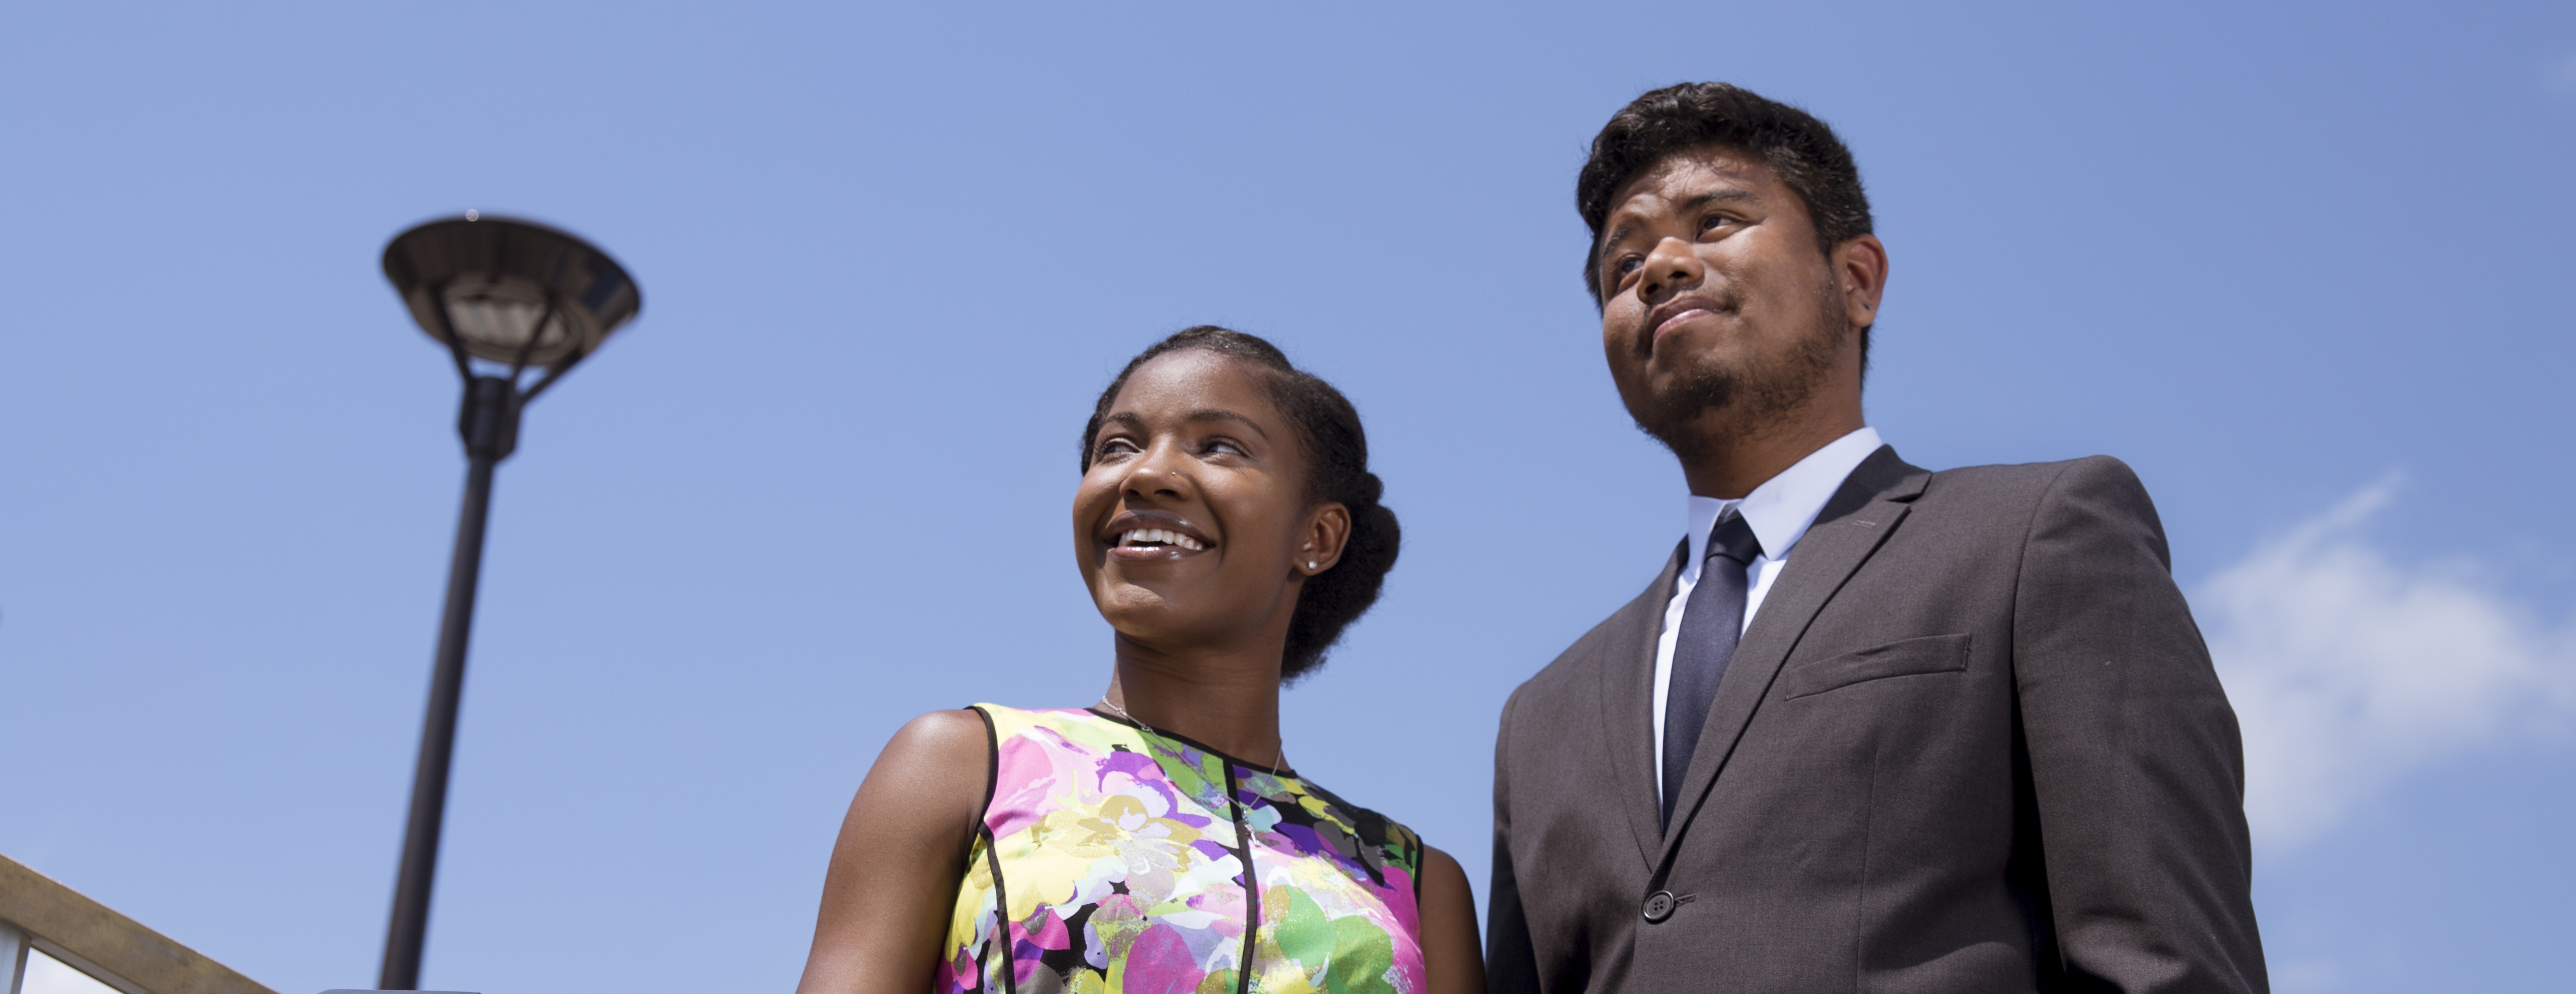 A student wearing a multicolor dress and a student wearing a grey suit smile as they look at a blue sky